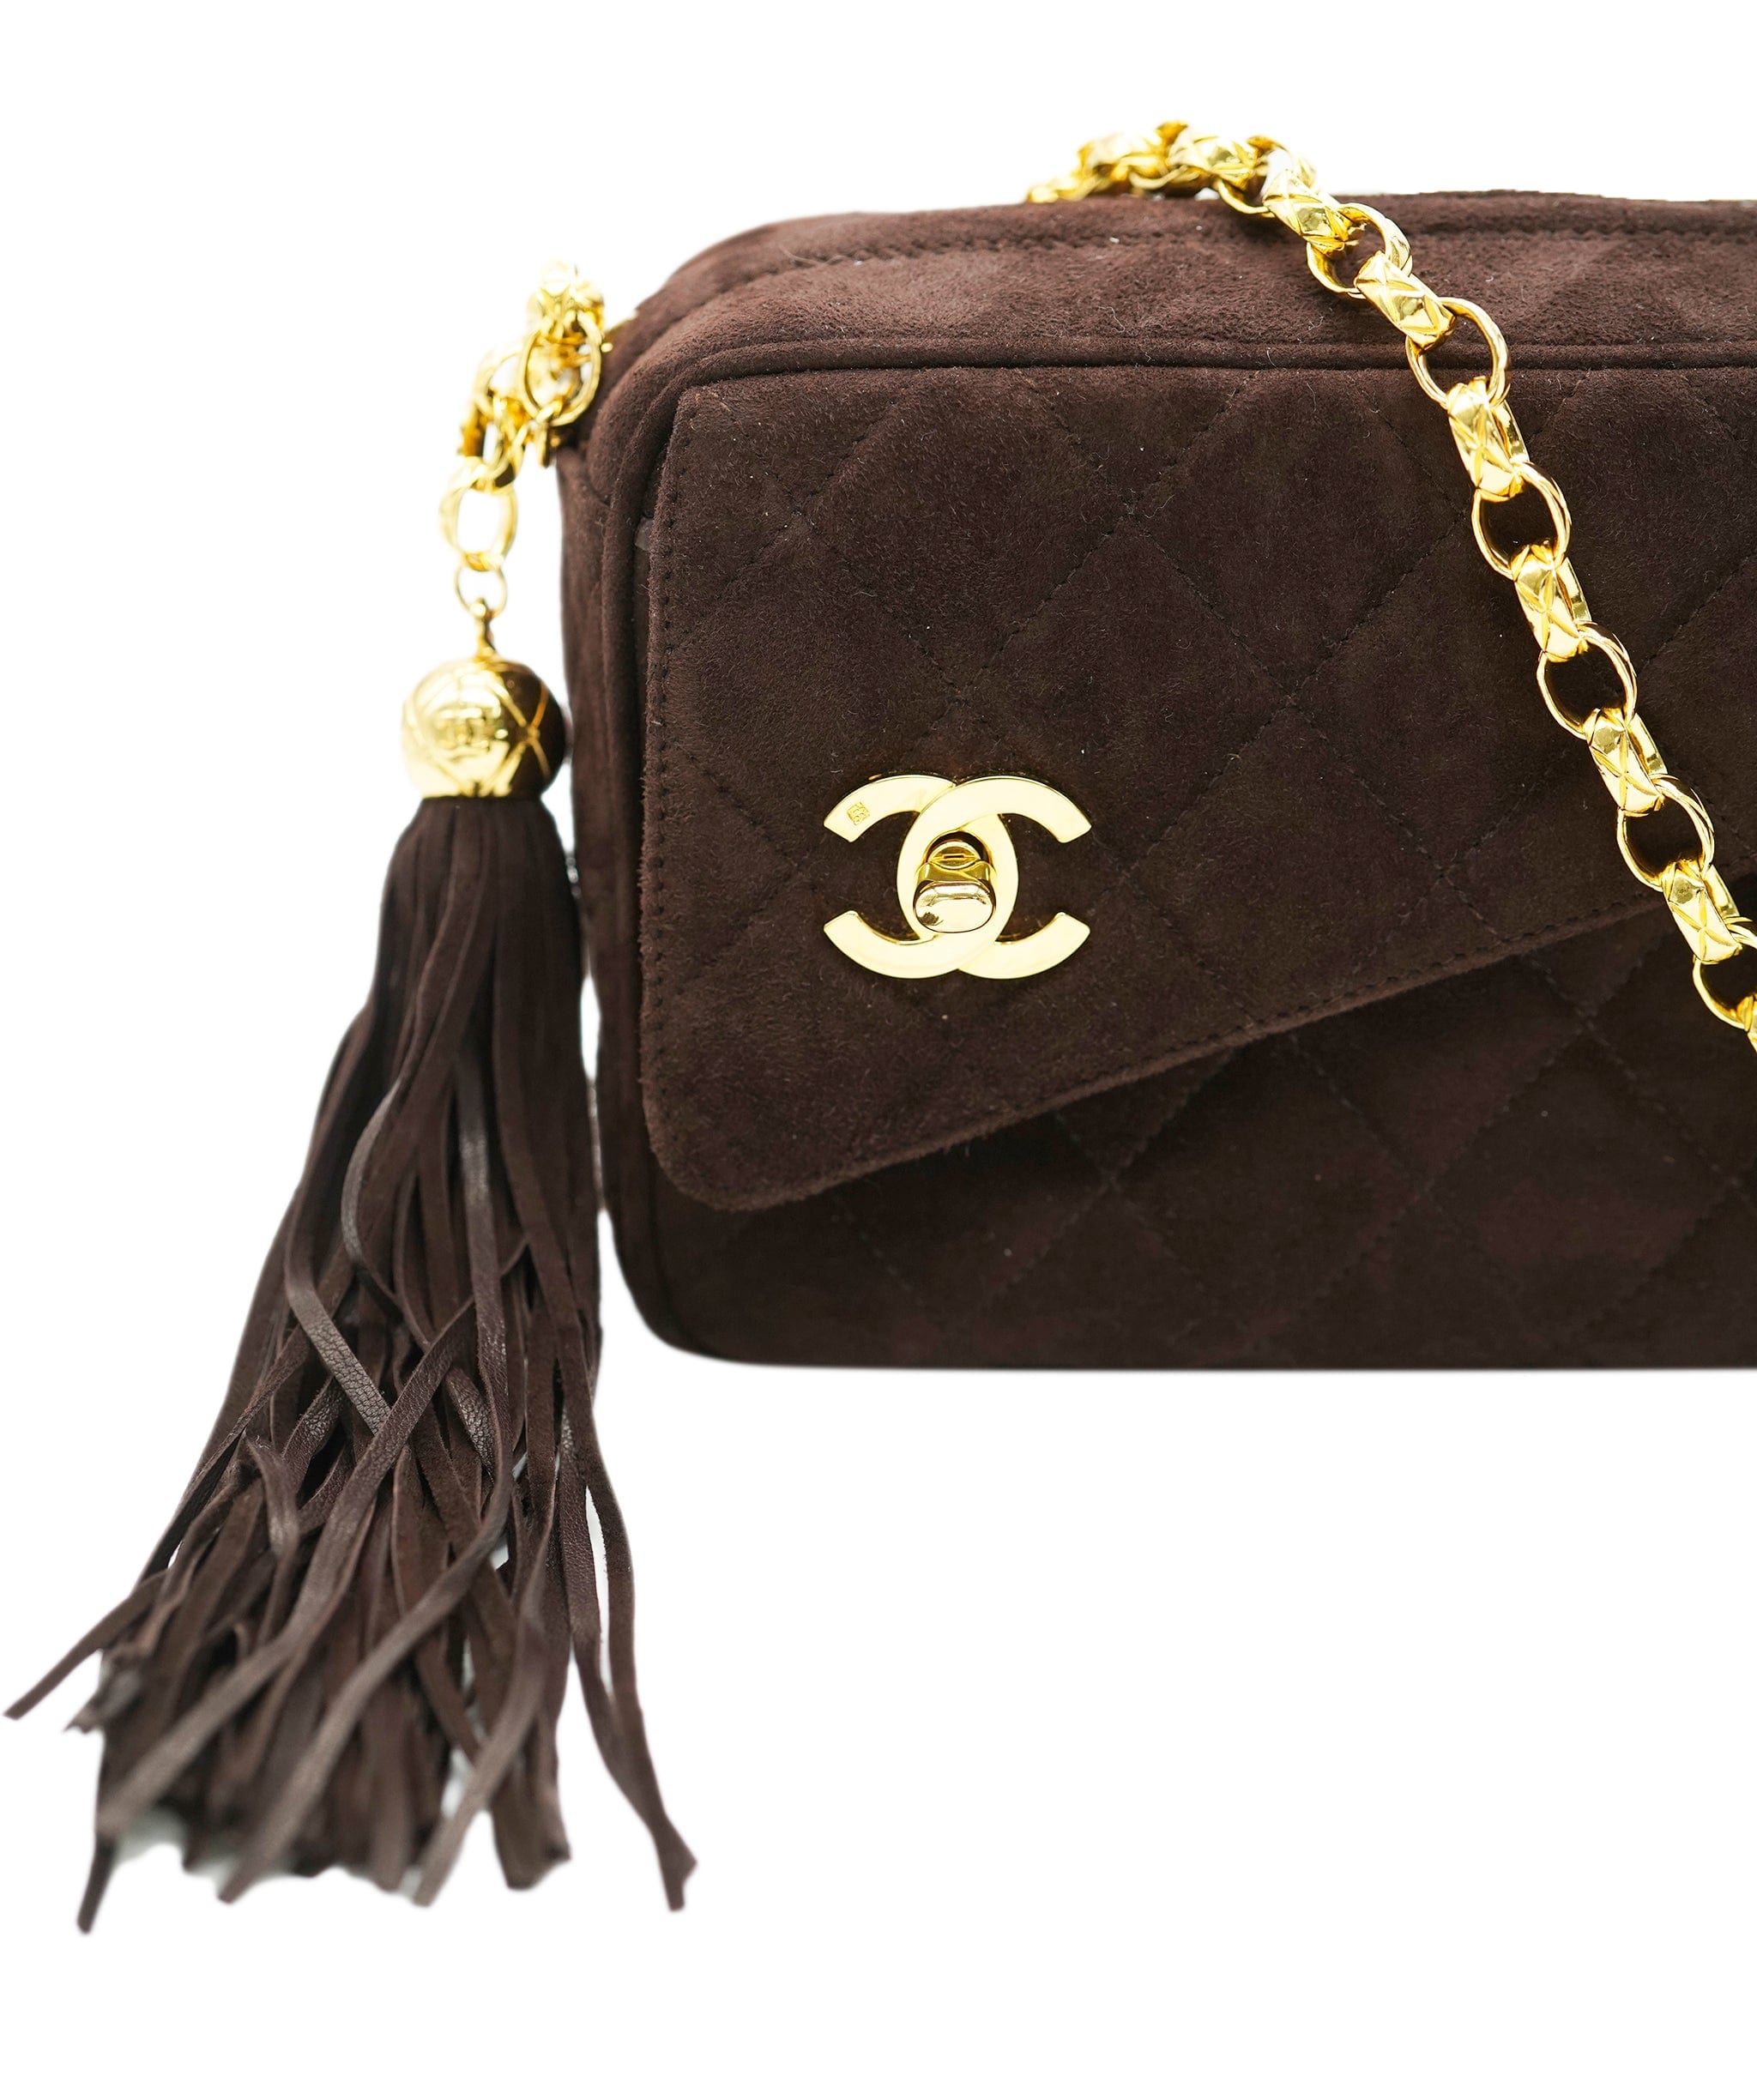 Chanel Chanel chocolate brown suede camera bag with GHW AJL0177